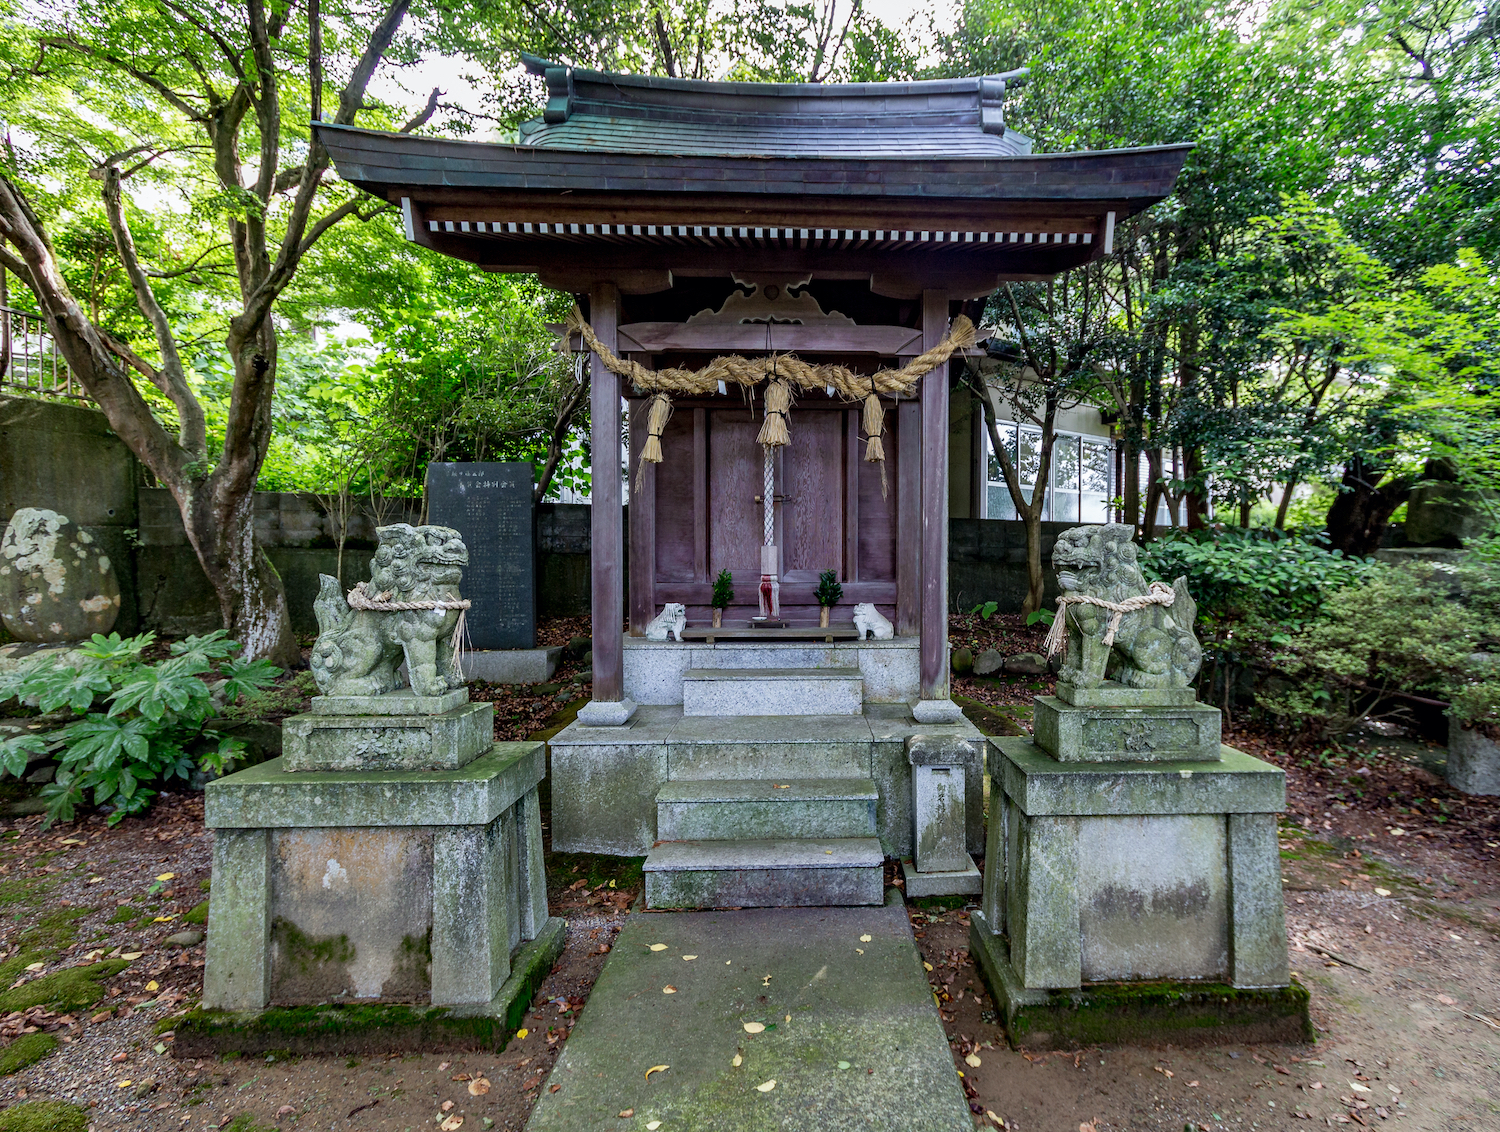 Shinto shrine, Kanazawa, Ishikawa Prefecture, Japan. In the foreground are two koma-inu, or lion-dogs. which serve as guardians of the shrine.